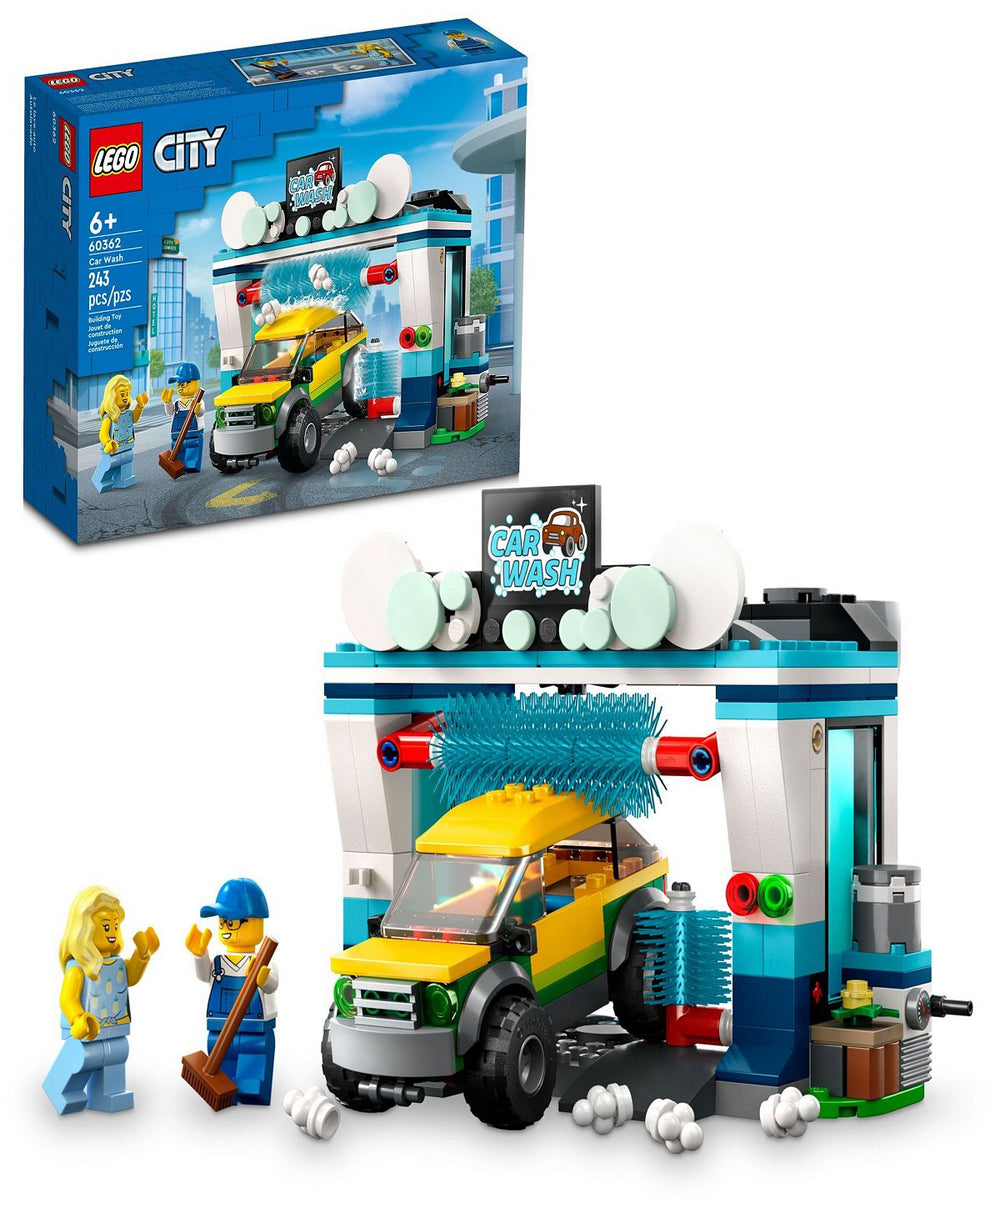 LEGO My City 60362 Interactive Car Wash Building Set with Minifigures